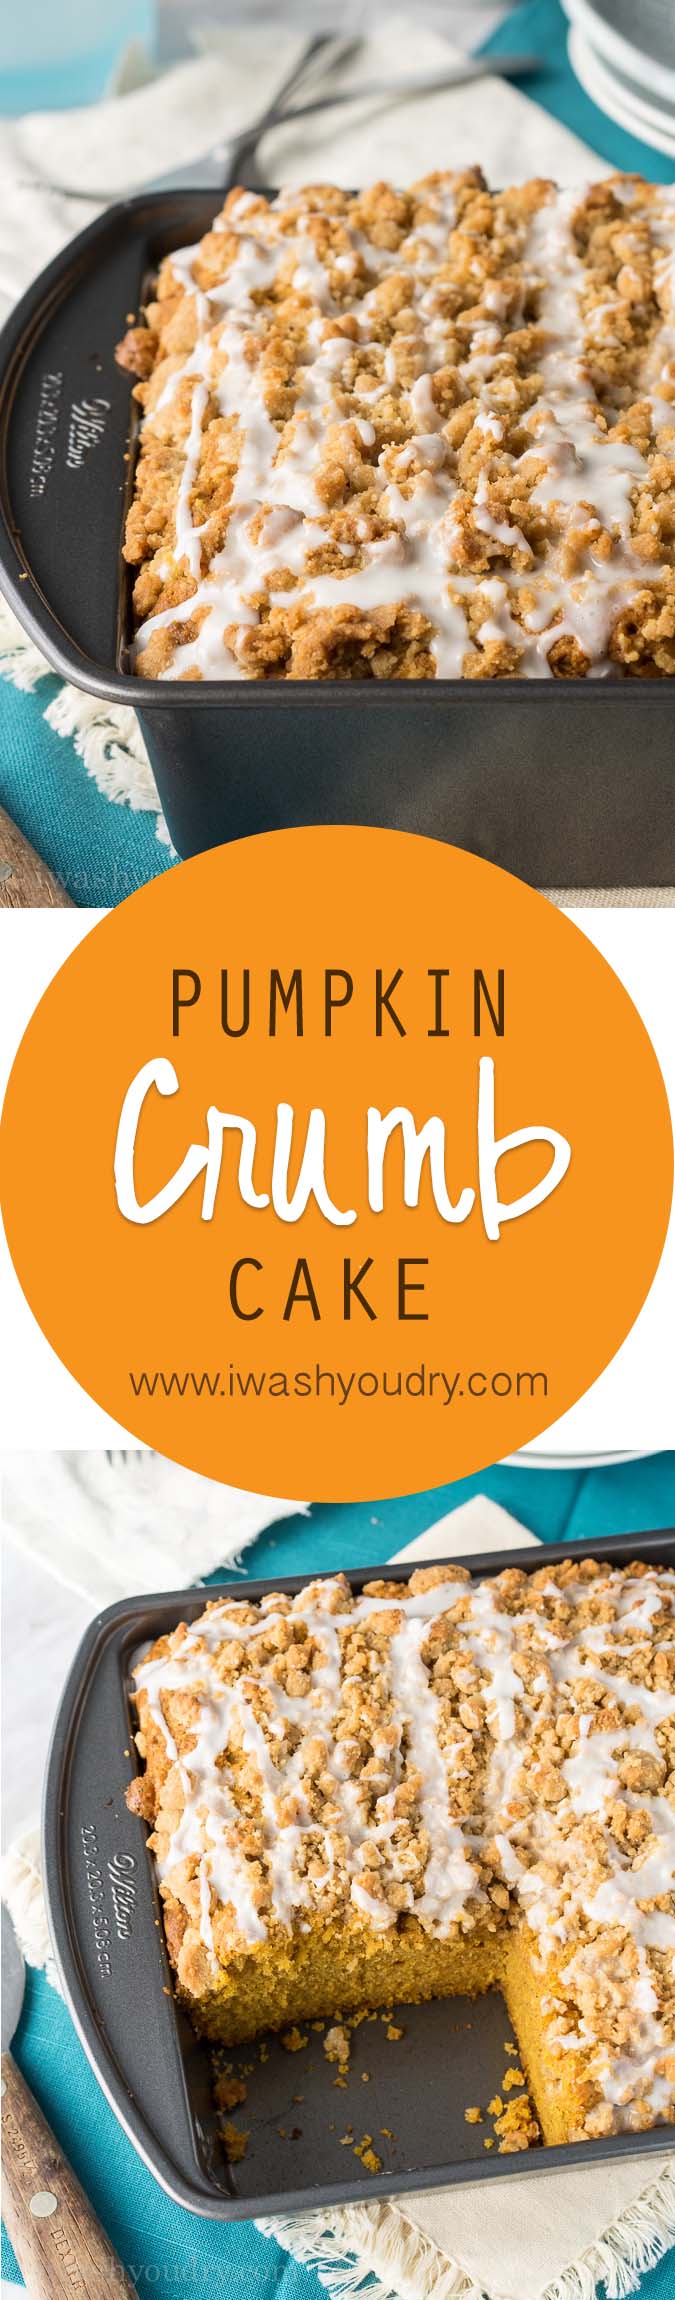 The most soft and delicious Pumpkin Crumb Cake with a sweet icing drizzled over a mound of delicious crumb topping! Such a great cake for this Fall!